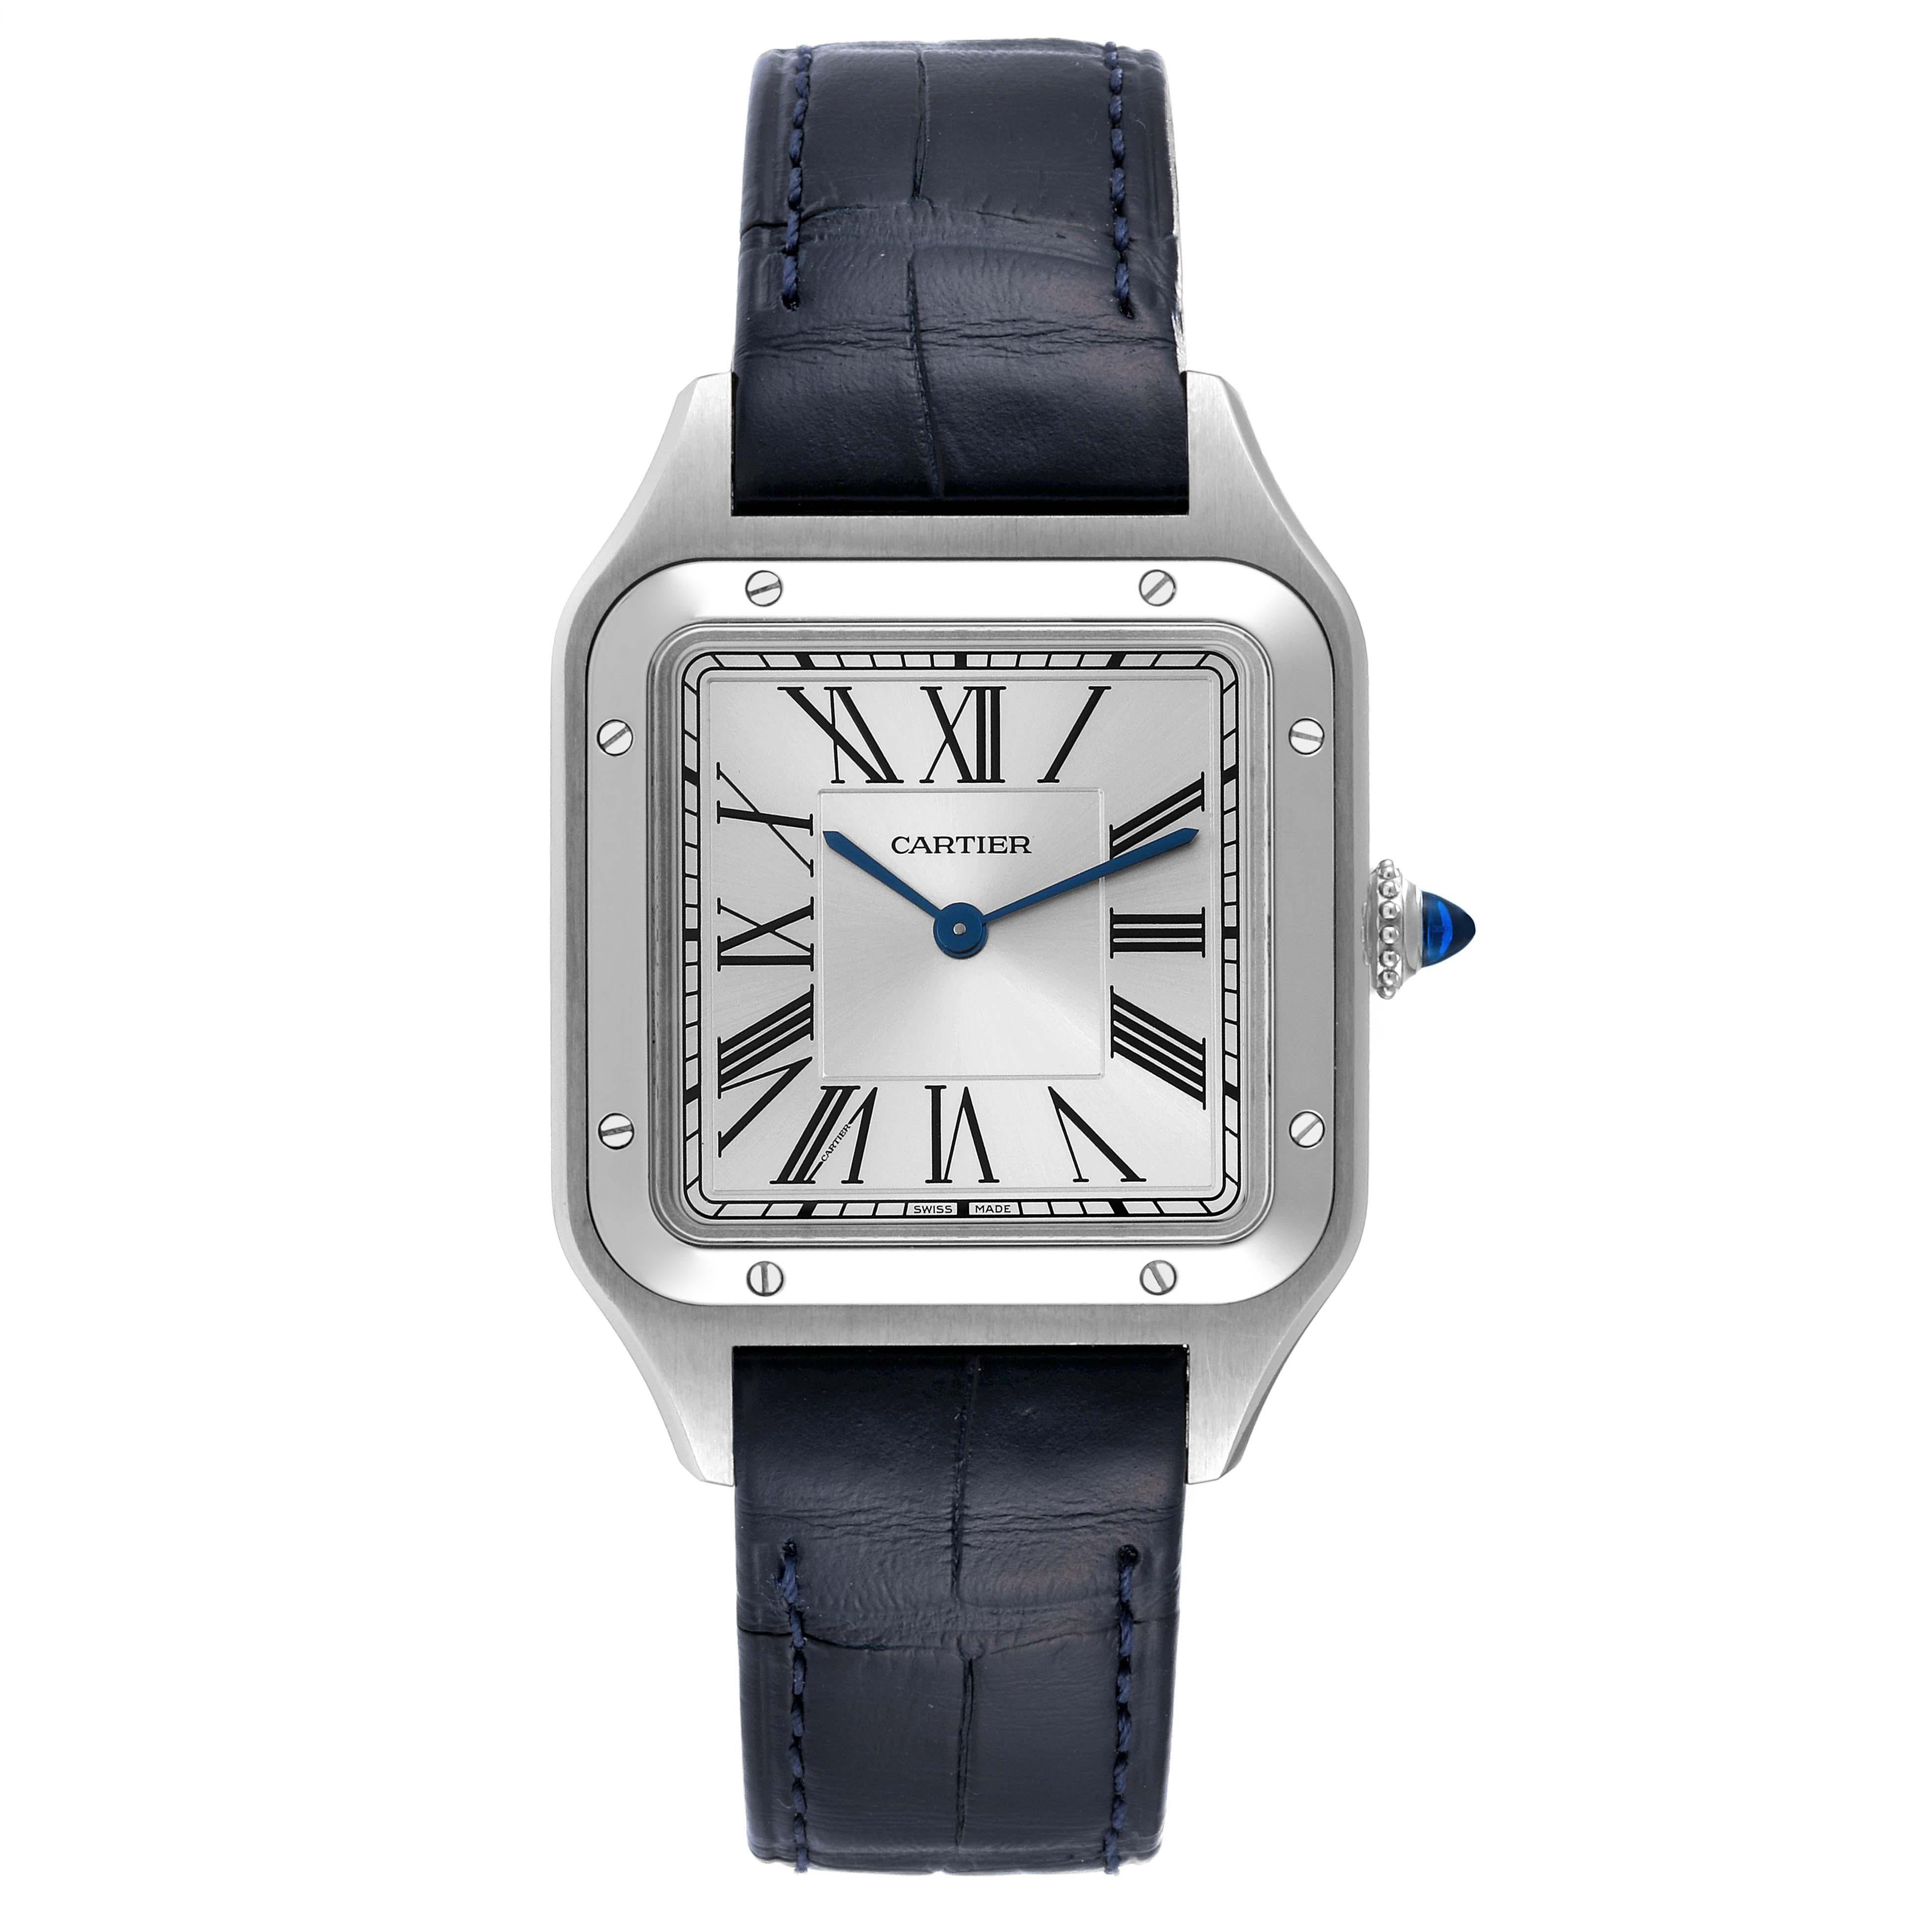 Cartier Santos Dumont Large Black Strap Steel Mens Watch WSSA0022 Box Card. Quartz movement. Stainless steel case 43.5 mm x 31.4 mm. Case thickness 7.3 mm. Circular grained crown set with blue spinel cabochon. Stainless steel bezel punctuated with 8